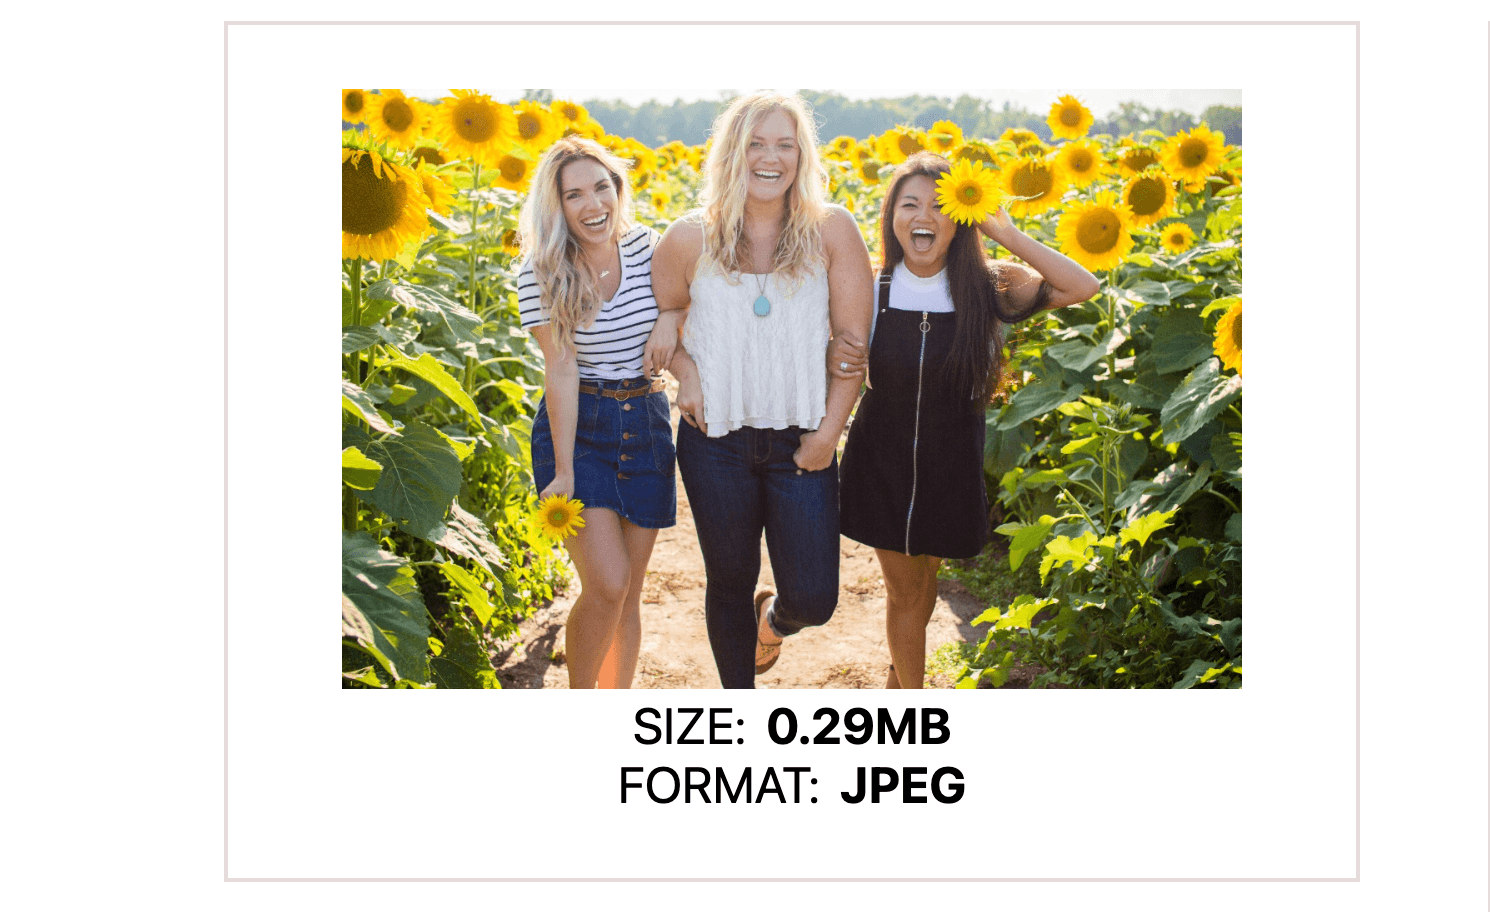 Image preview component - image, size: 0.29MB, format: JPEG